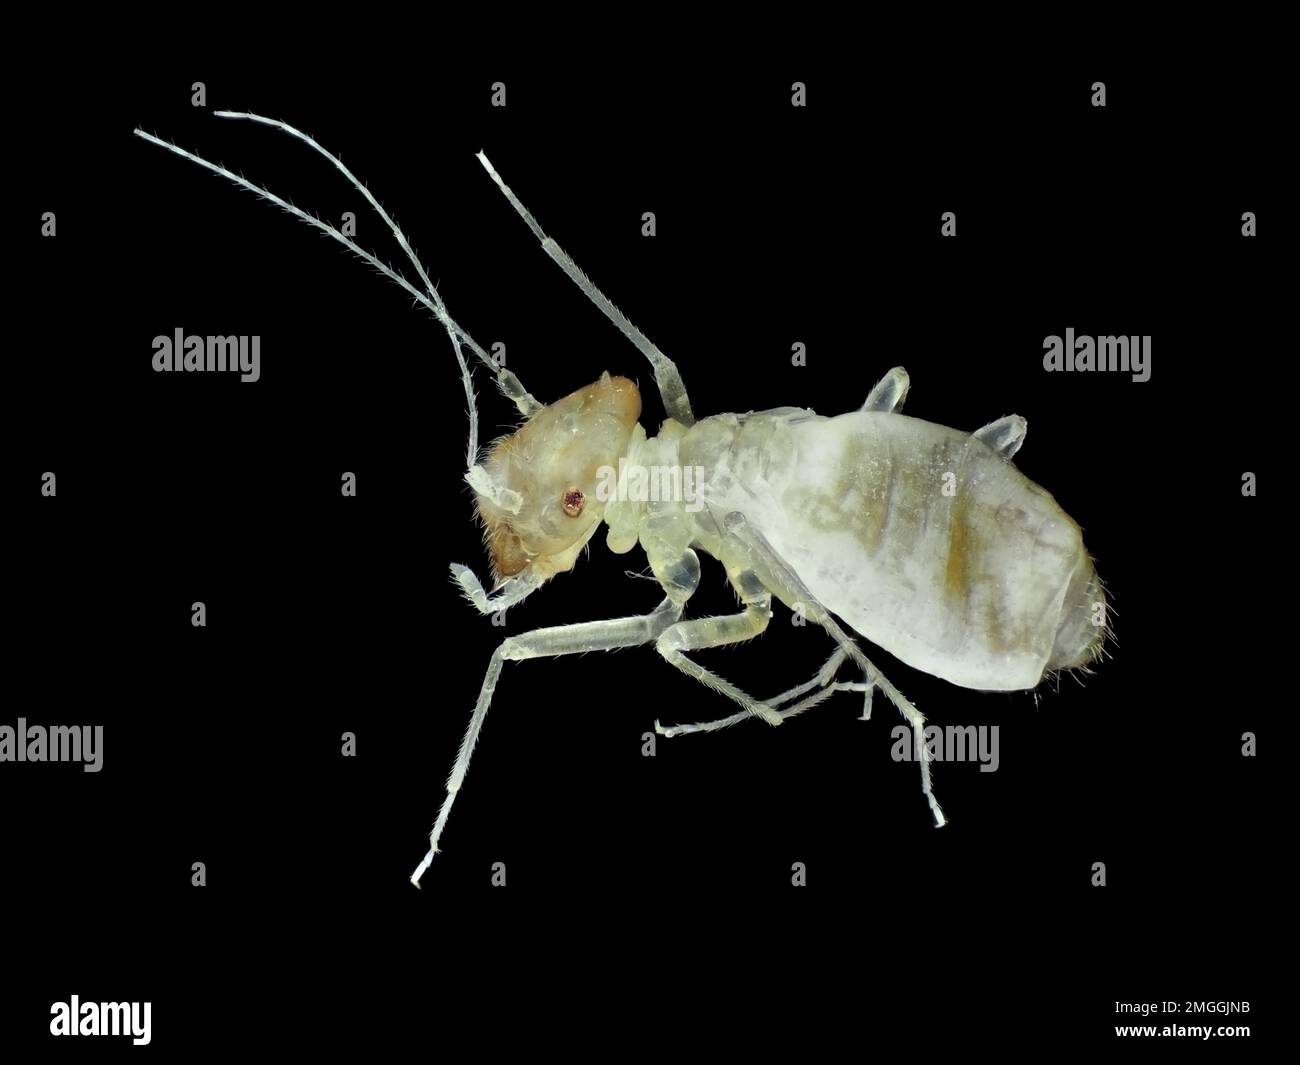 Psocidae (barklouse), about 1.6 mm in length, reflected light micrograph Stock Photo